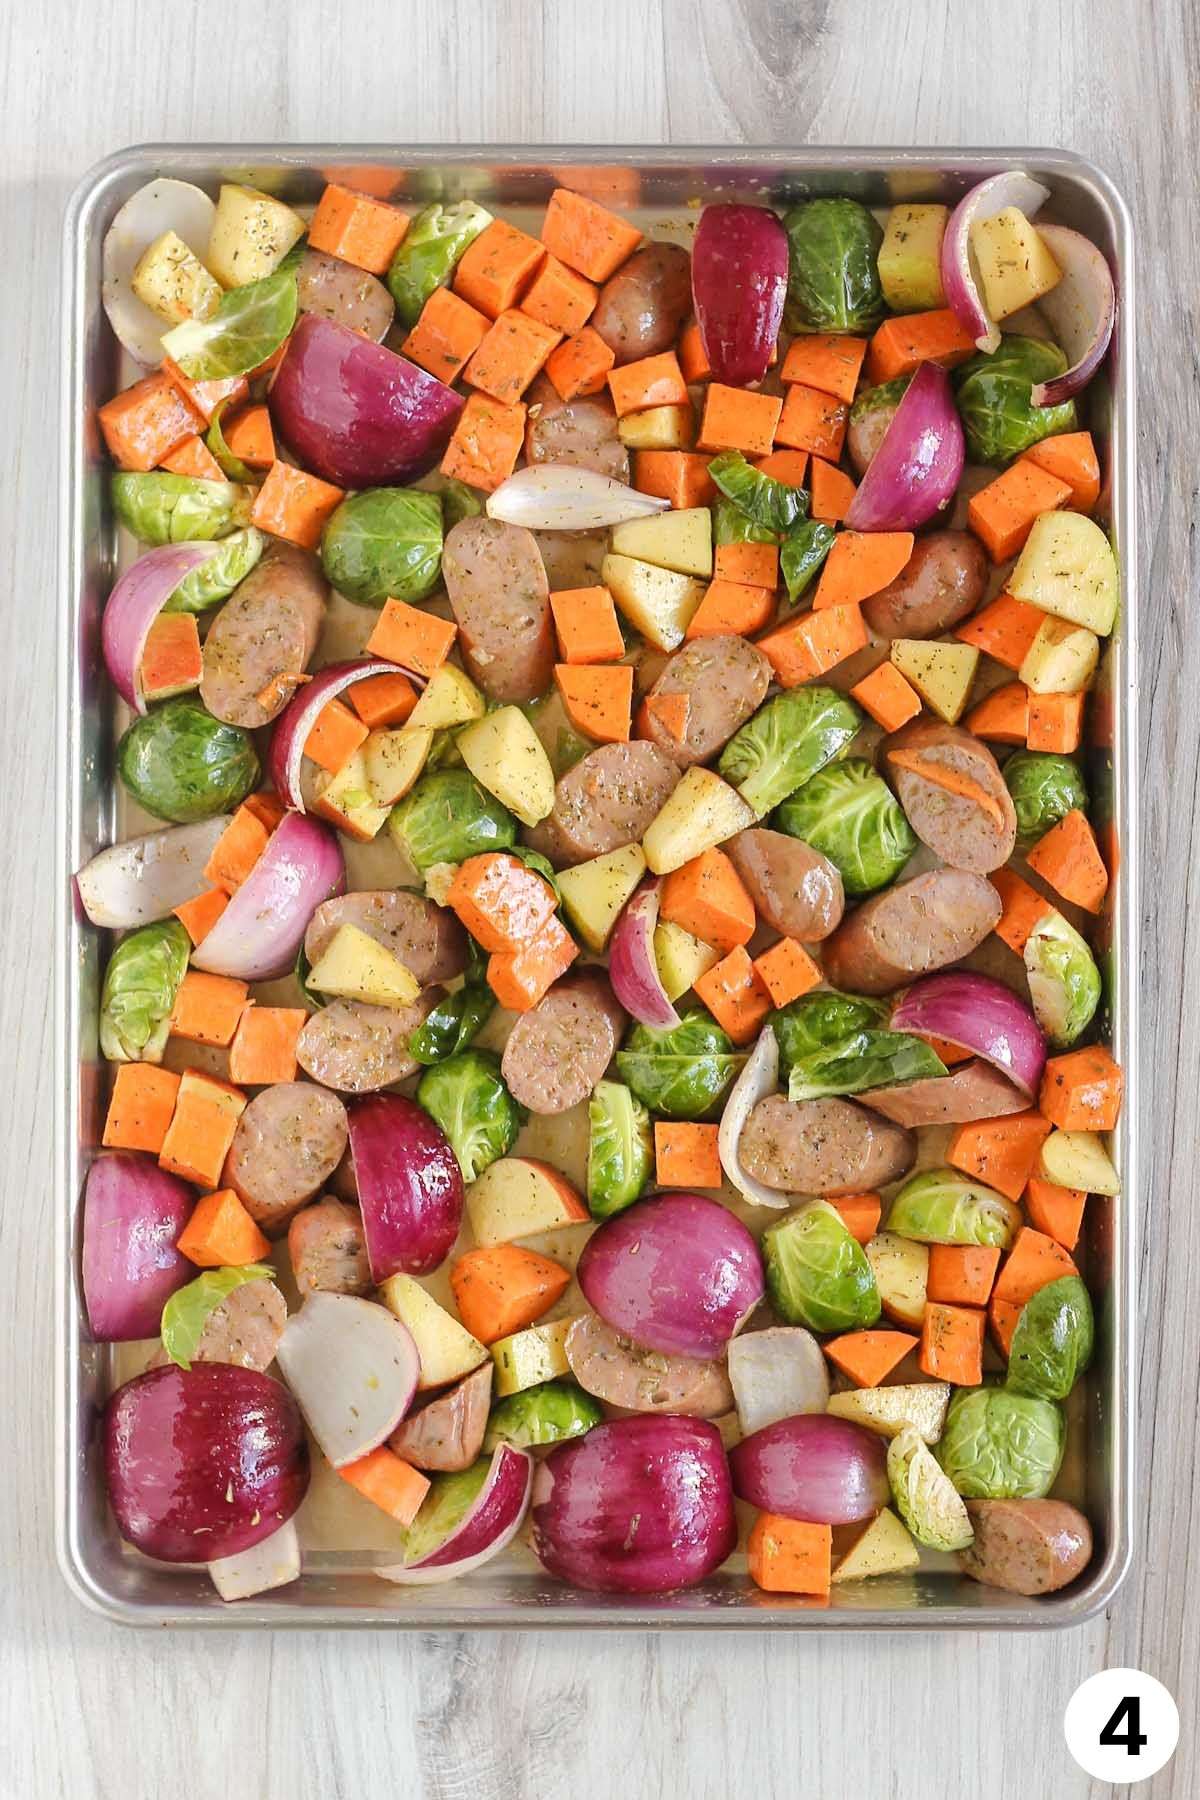 Sliced chicken sausage, chopped vegetables, and chopped apple on a large baking sheet before being cooked.